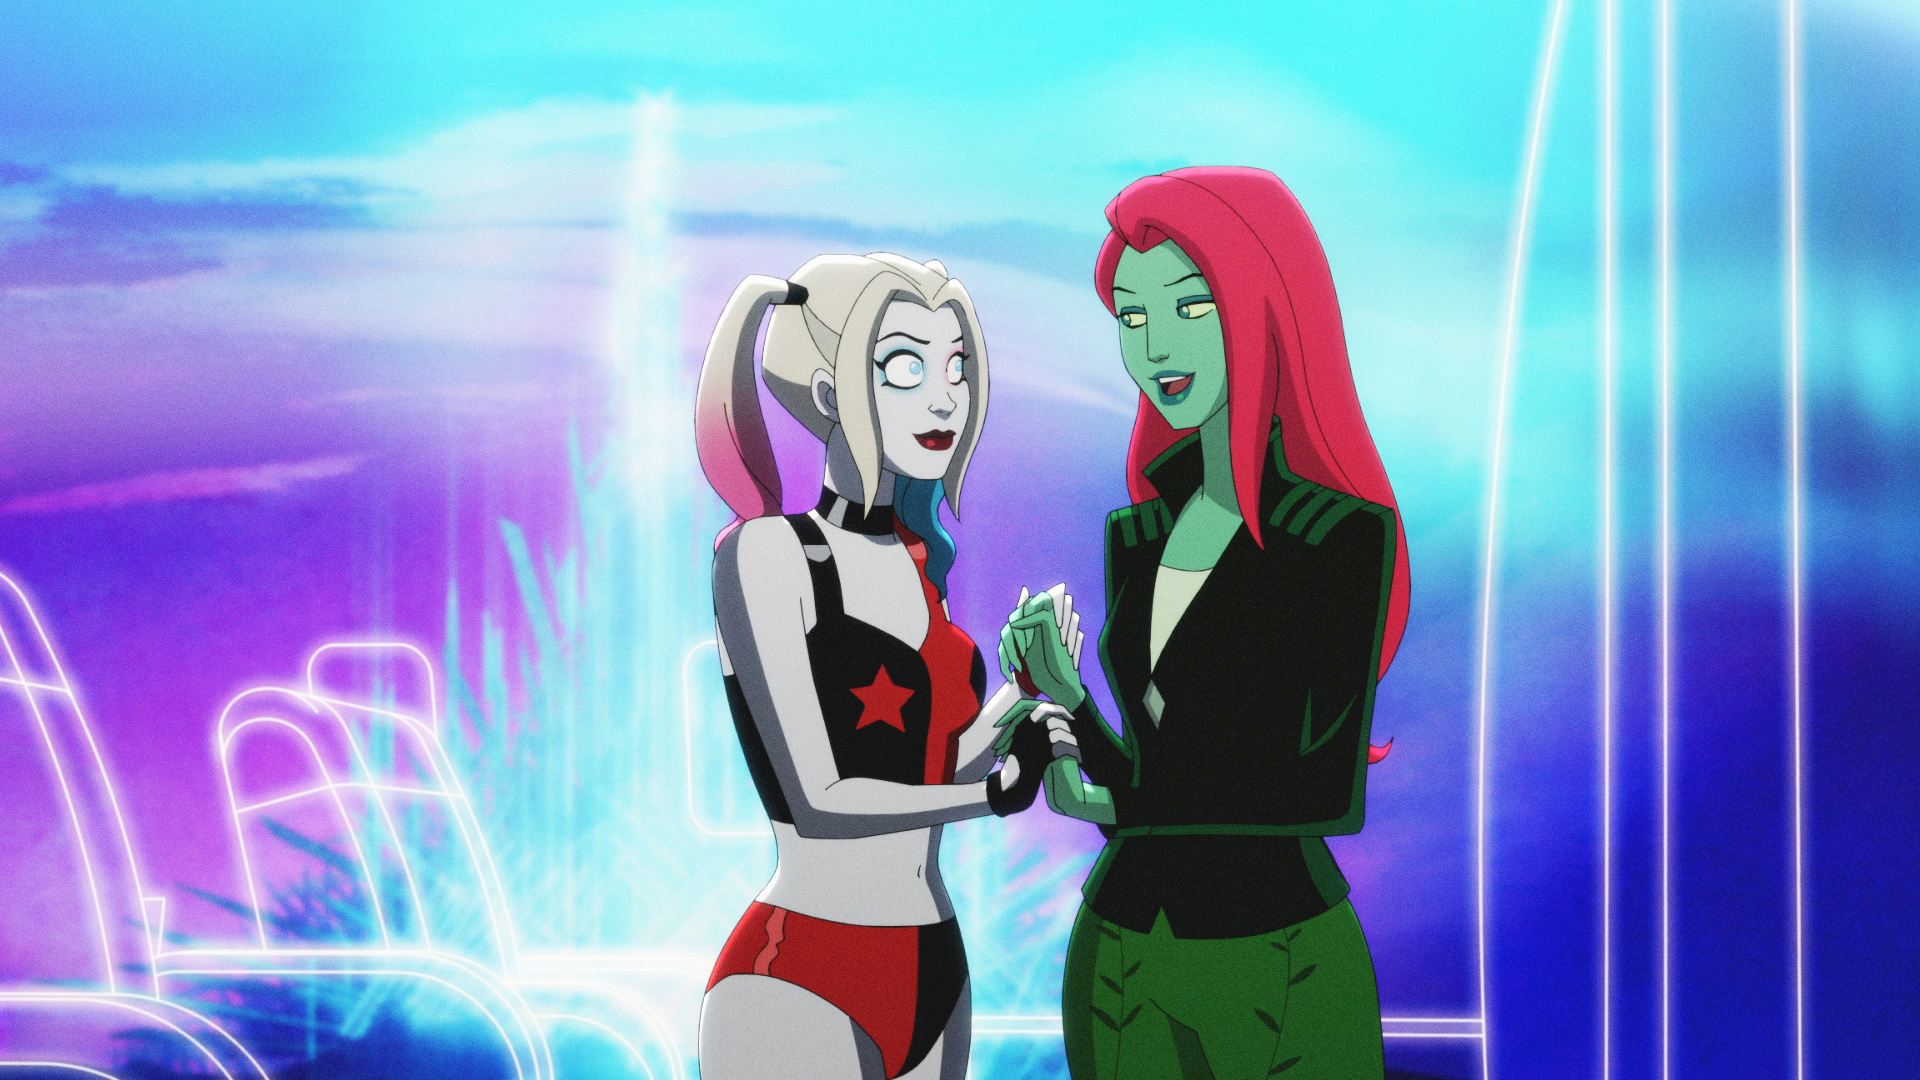 (L to R) Harley Quinn (voiced by Kaley Cuoco) and Poison Ivy (voiced by Lake Bell) in Wonder Woman's invisible jet in Harley Quinn